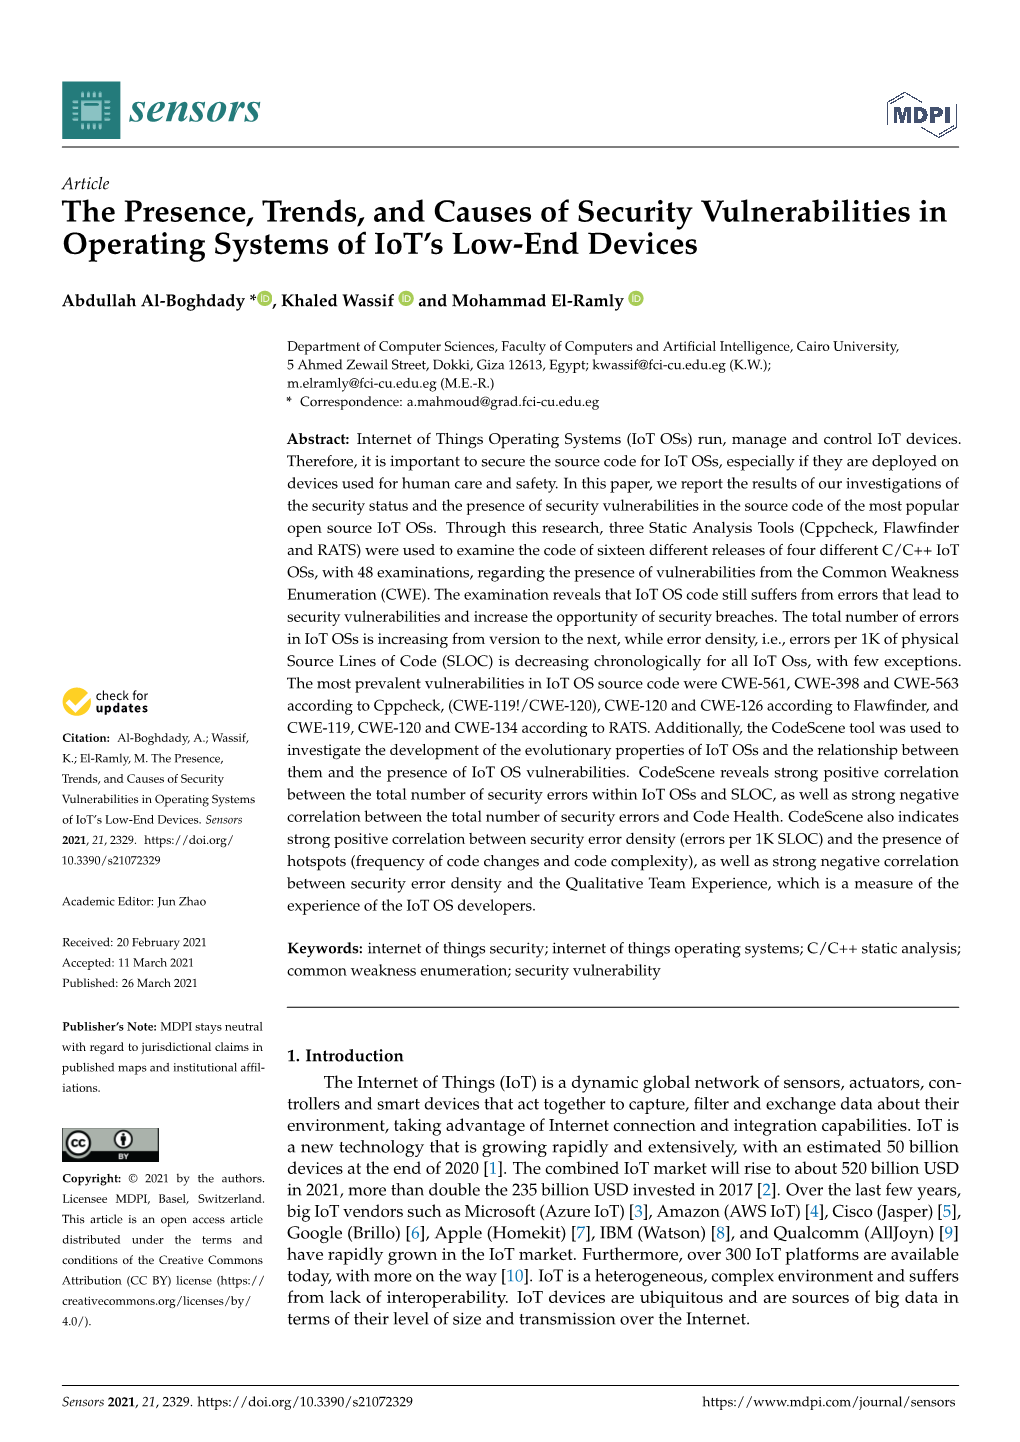 The Presence, Trends, and Causes of Security Vulnerabilities in Operating Systems of Iot’S Low-End Devices